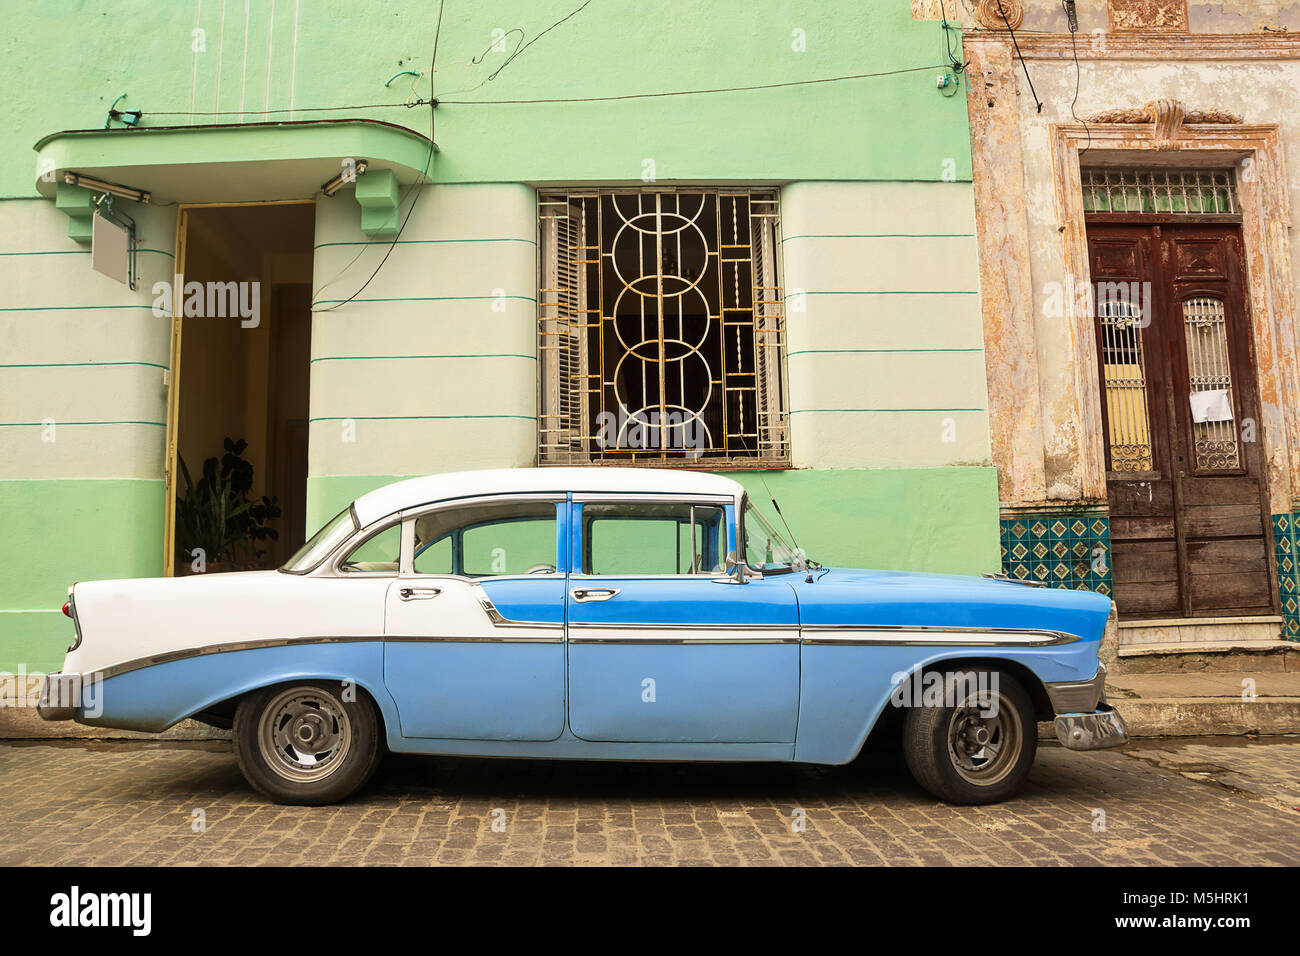 Old American car parked on the cuban street Stock Photo